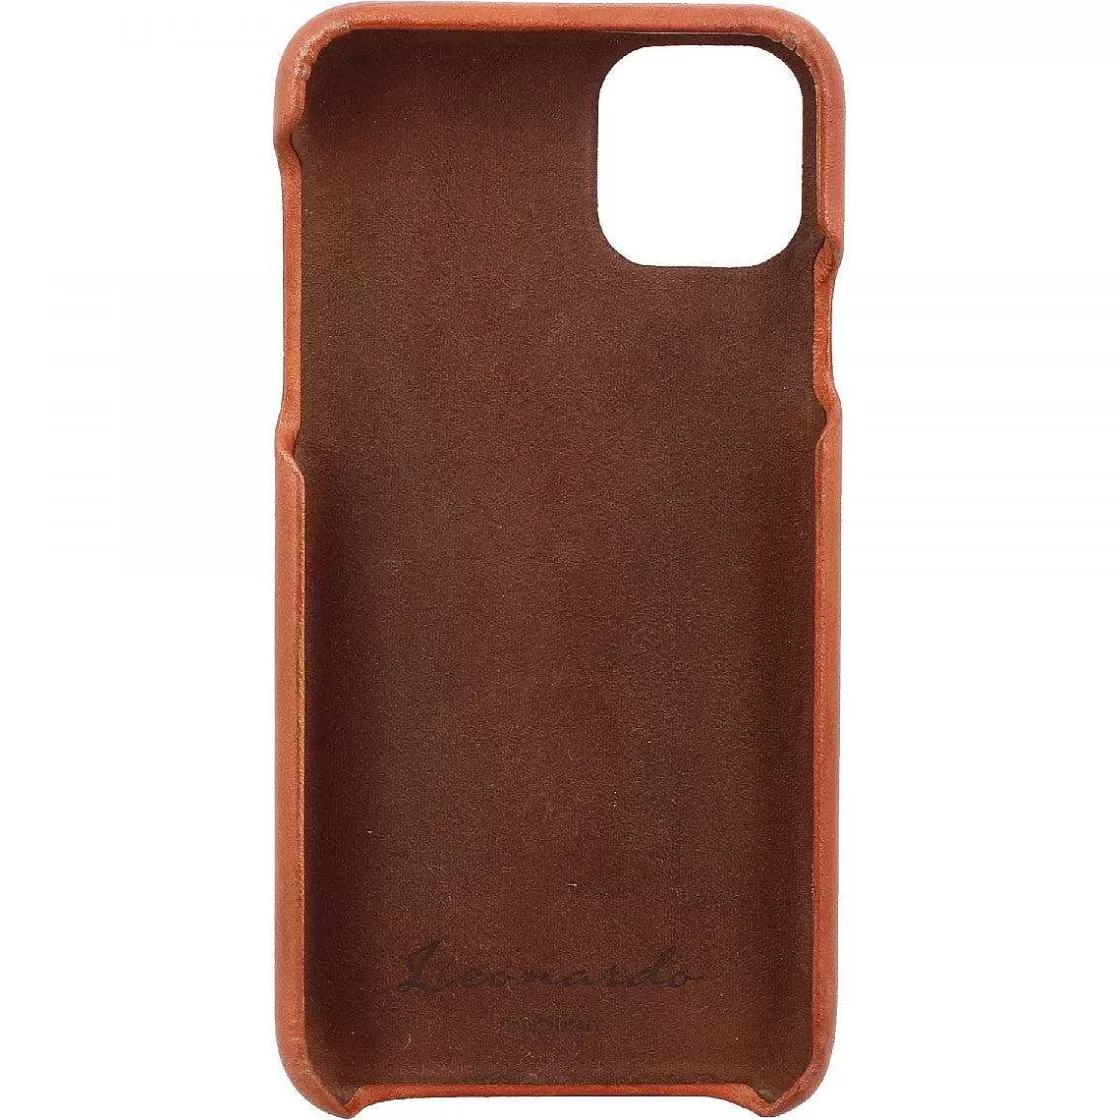 Leonardo Iphone Cover In Hand-Buffered Leather Leather Shop